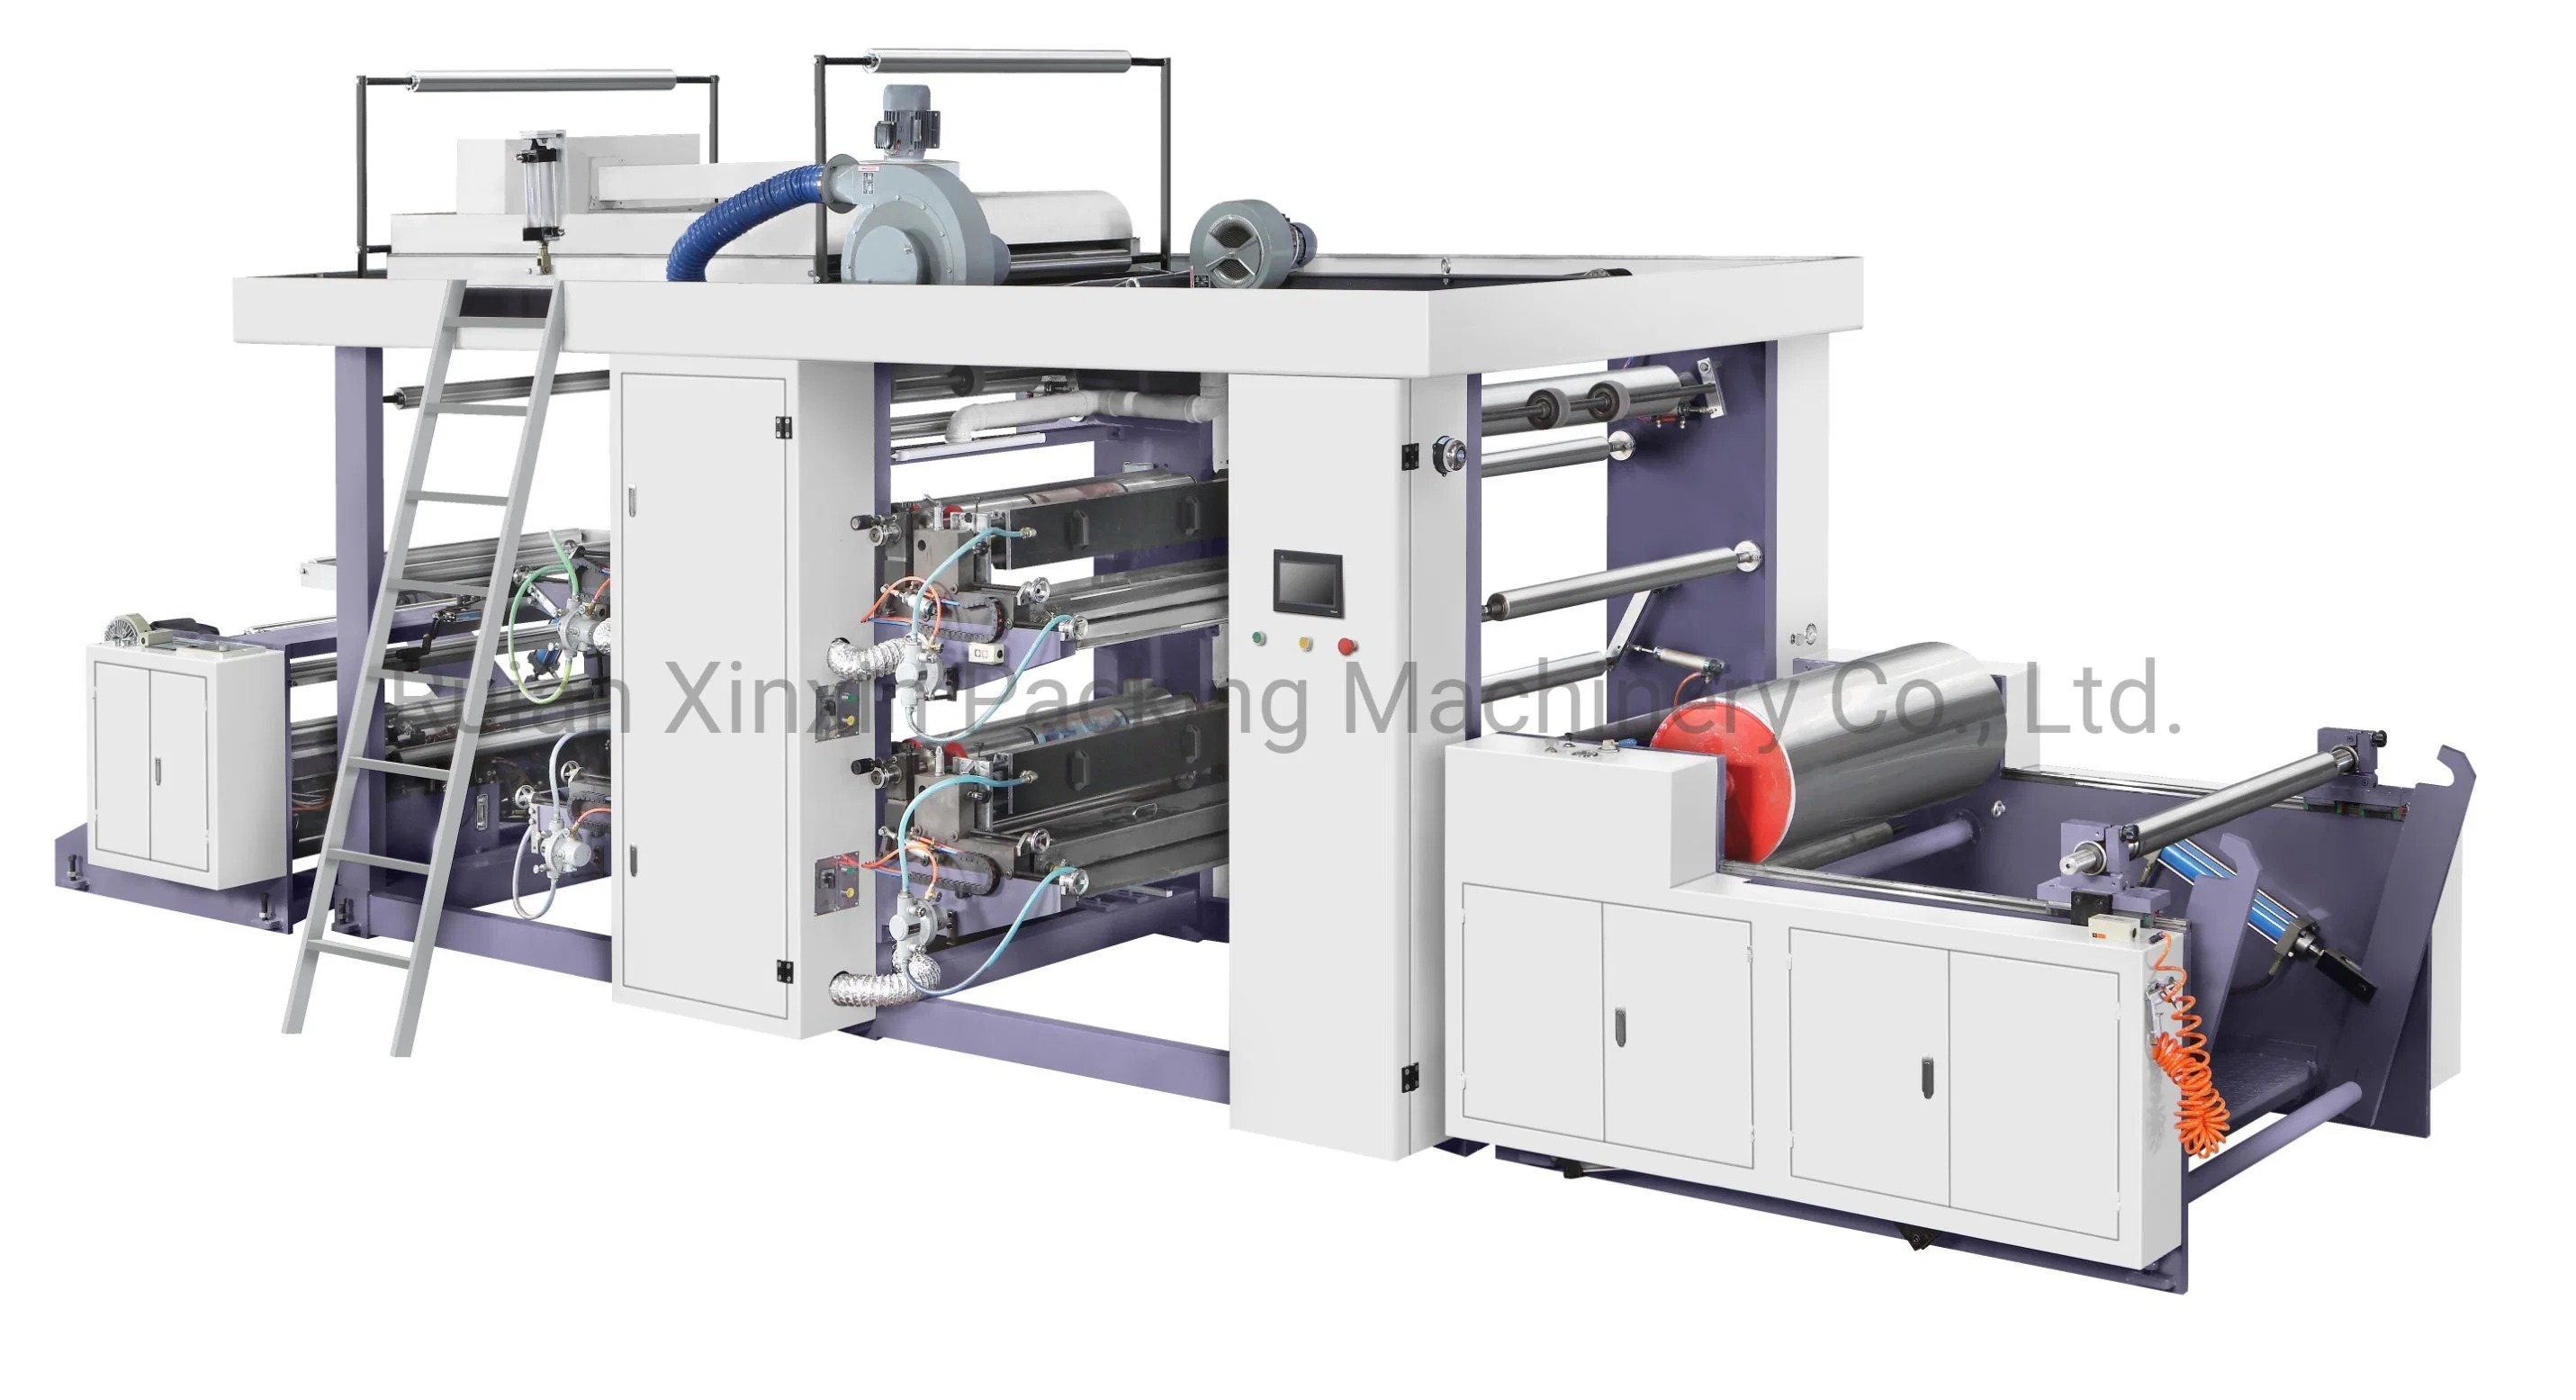 4color High Speed Automatic Flexographic/Flexo Printing Machine for Paper Bag/Non-Woven/PP/Plastic Film/Shopping Bag Paper Cup with CE